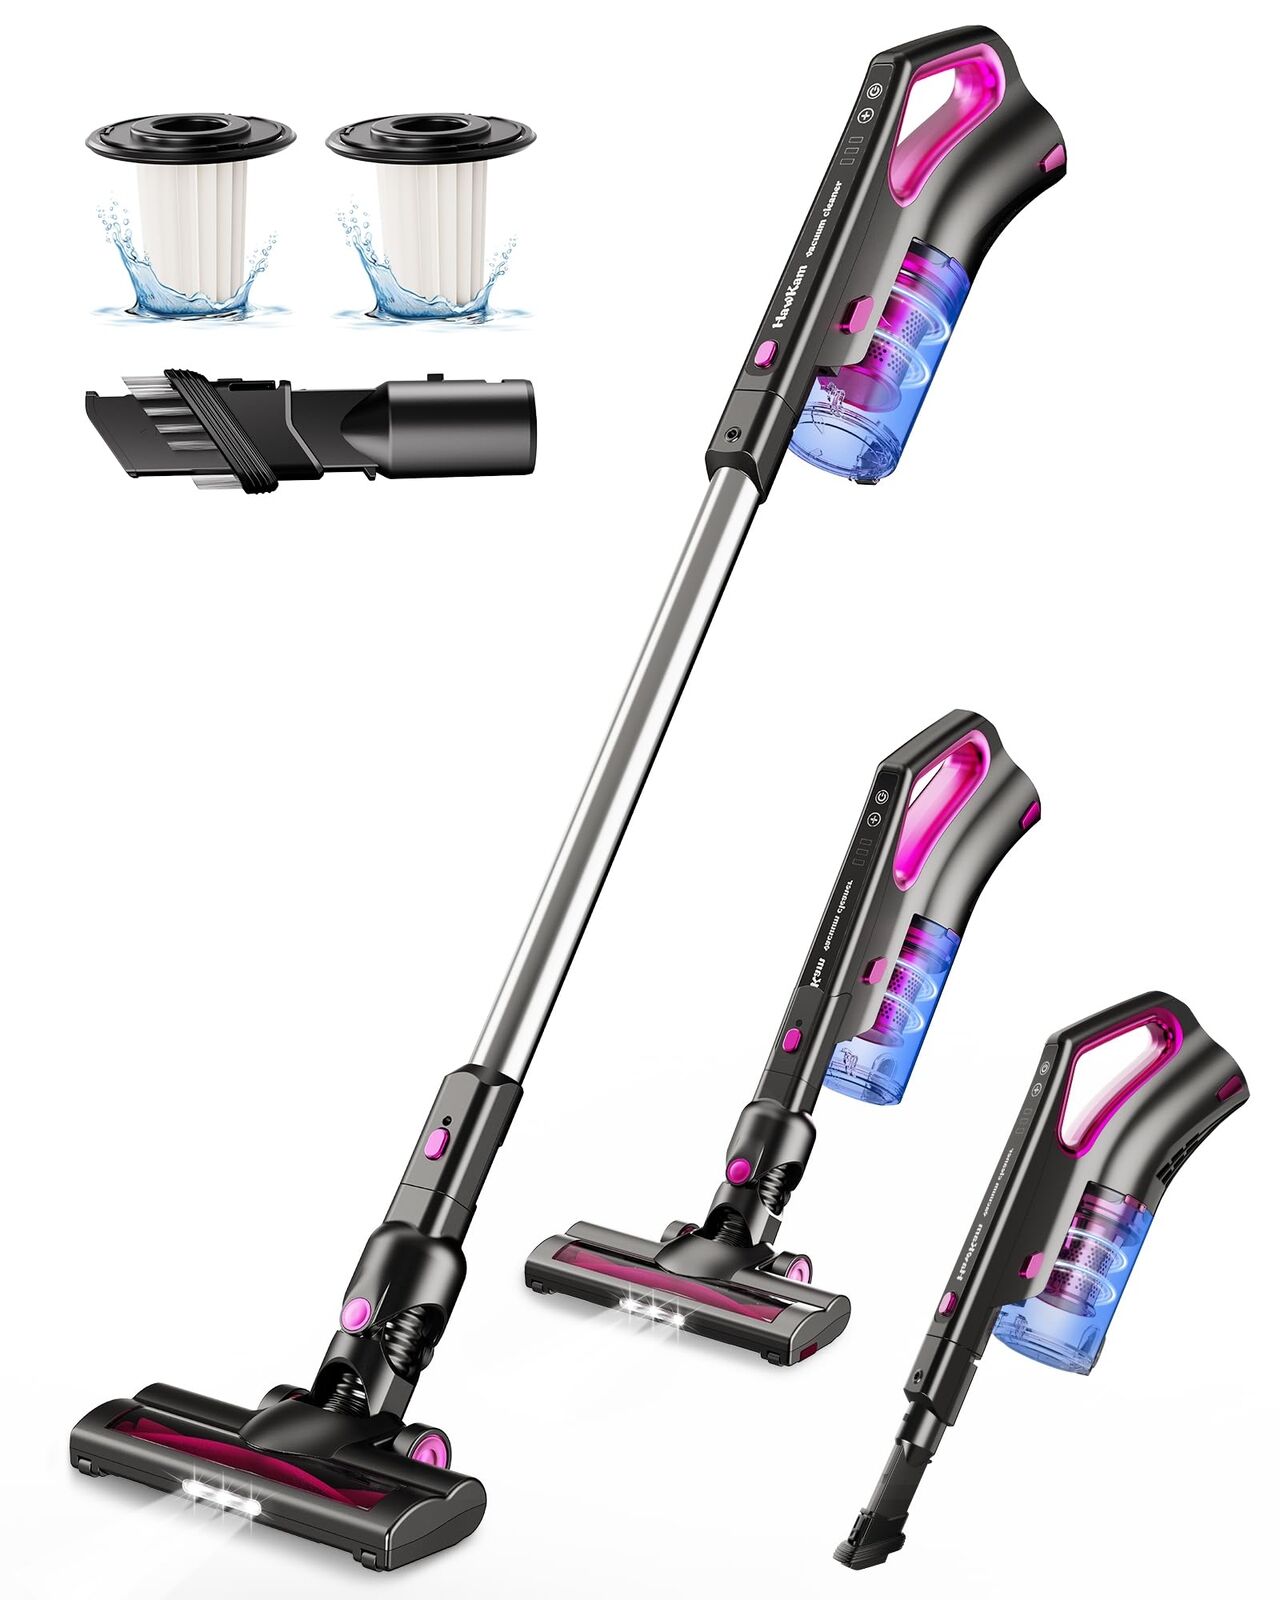 Cordless Vacuum Cleaner with 2200mAh Detachable Battery, Telescopic Wand, 7 i...